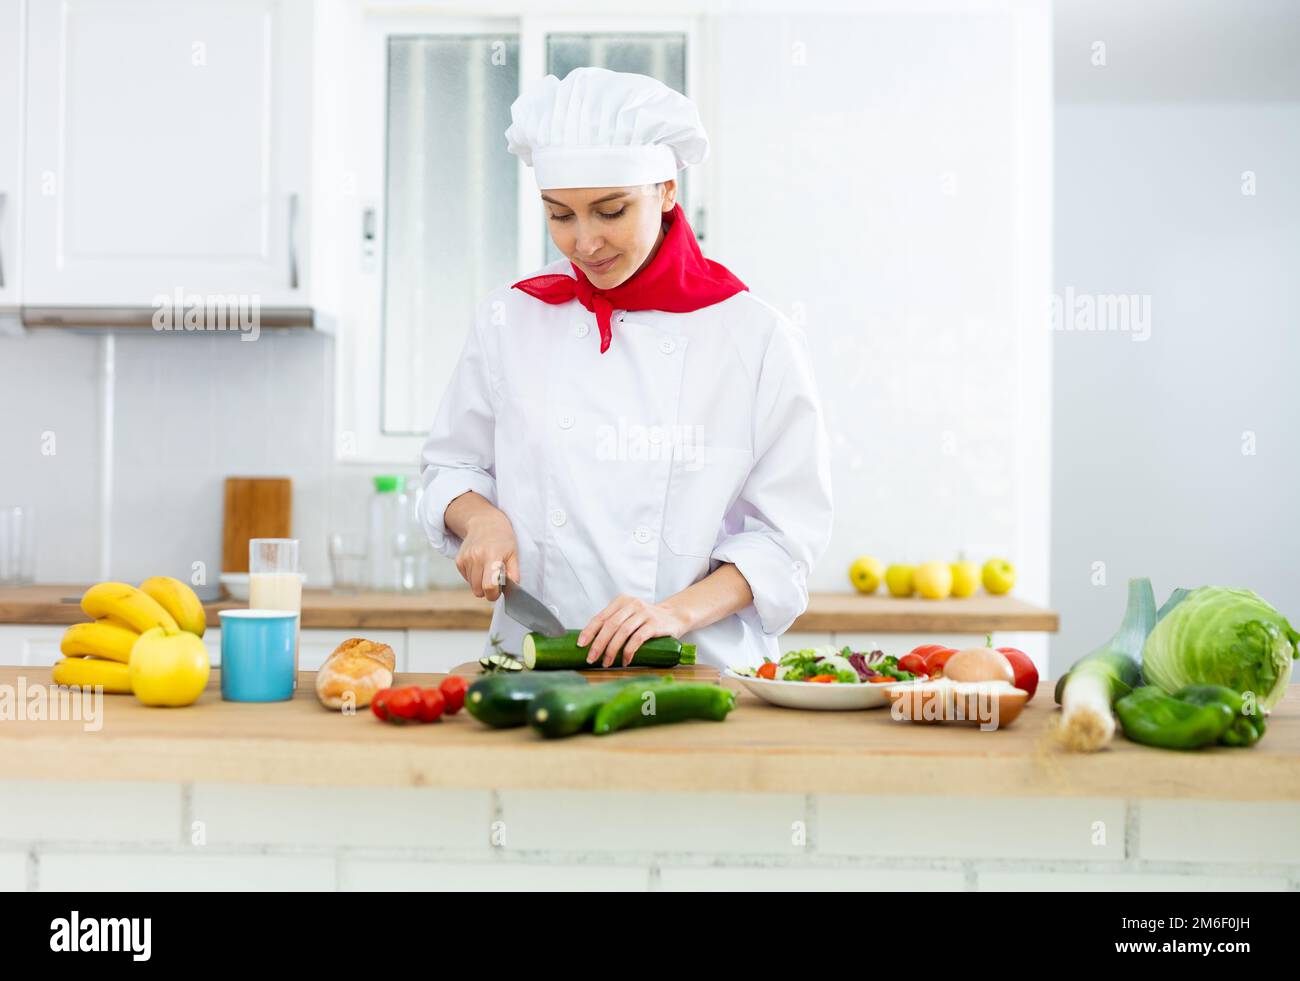 Woman Chopping Vegetables - Stock Image - F003/5963 - Science Photo Library